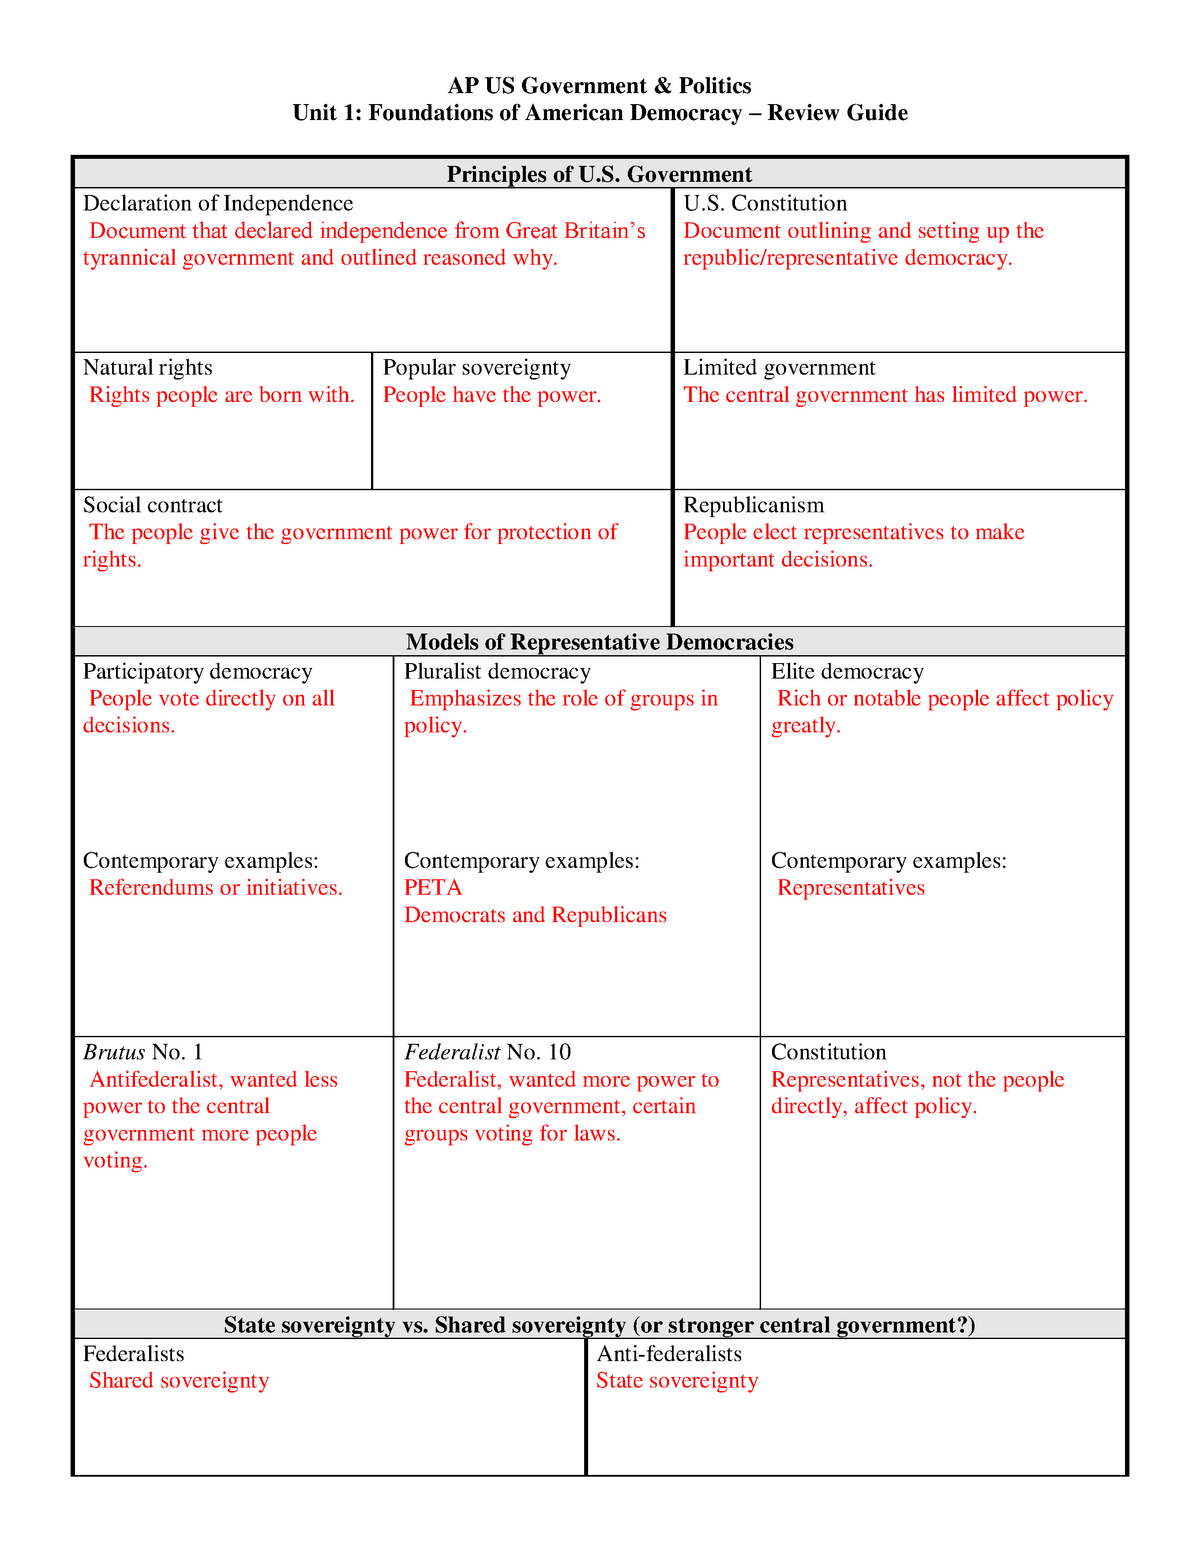 ap-government-and-politics-unit-1-study-guide-study-poster